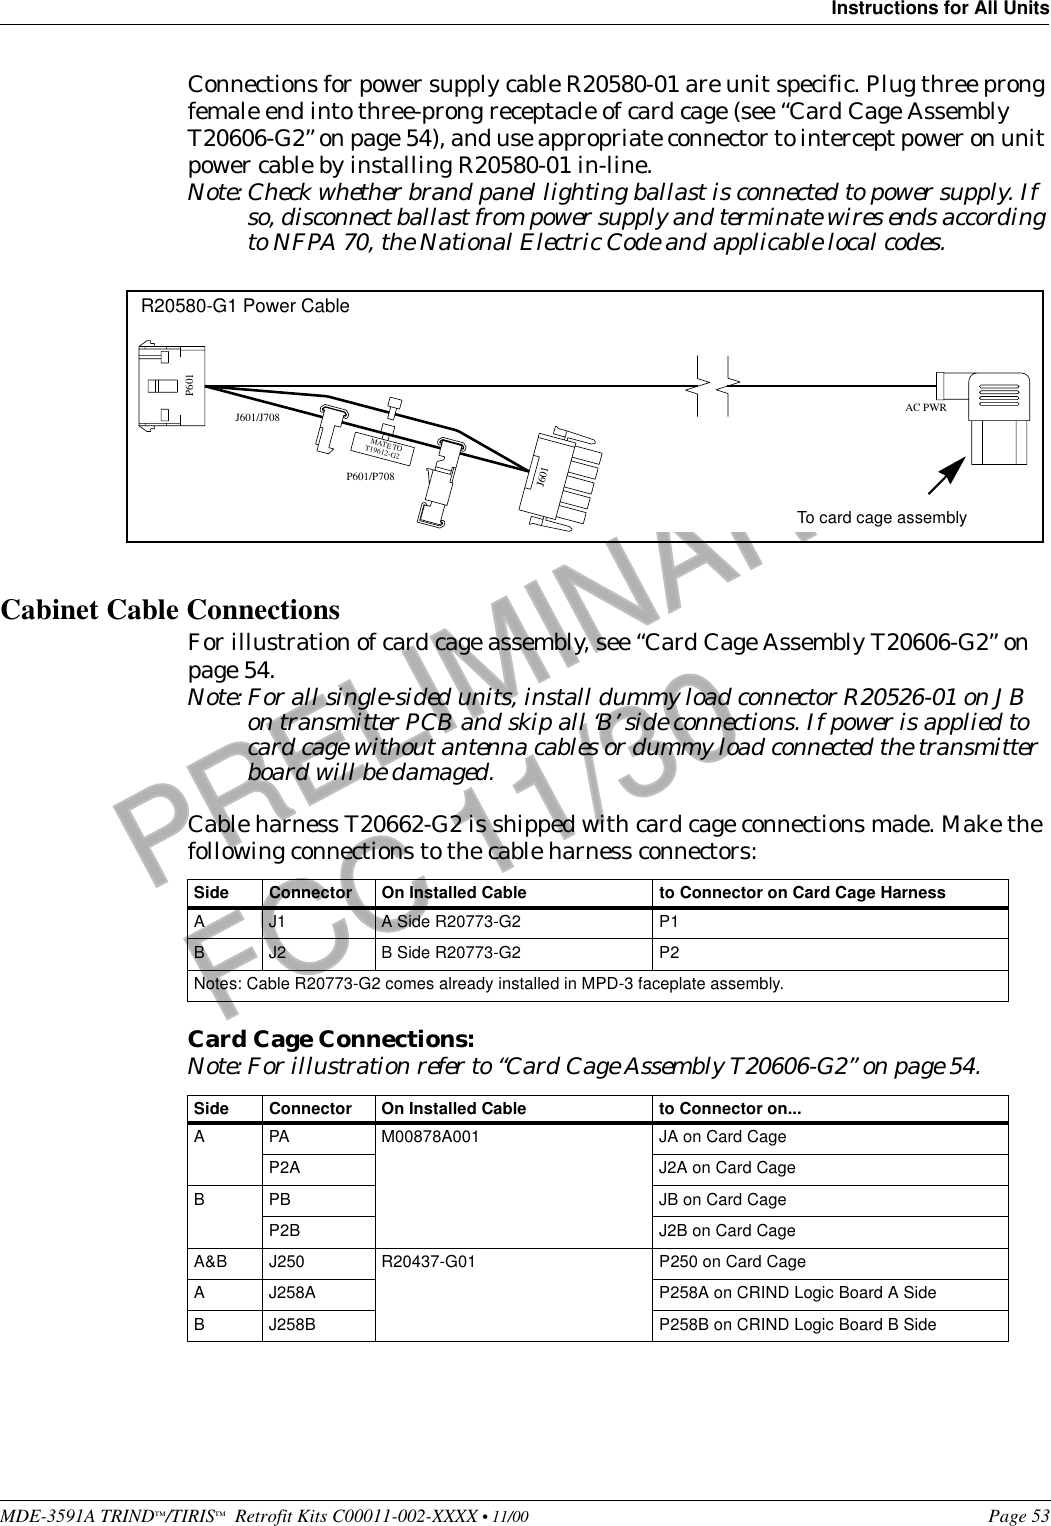 MDE-3591A TRIND™/TIRIS™  Retrofit Kits C00011-002-XXXX • 11/00 Page 53Instructions for All UnitsPRELIMINARYFCC 11/30Connections for power supply cable R20580-01 are unit specific. Plug three prong female end into three-prong receptacle of card cage (see “Card Cage Assembly T20606-G2” on page 54), and use appropriate connector to intercept power on unit power cable by installing R20580-01 in-line.Note: Check whether brand panel lighting ballast is connected to power supply. If so, disconnect ballast from power supply and terminate wires ends according to NFPA 70, the National Electric Code and applicable local codes.Cabinet Cable ConnectionsFor illustration of card cage assembly, see “Card Cage Assembly T20606-G2” on page 54.Note: For all single-sided units, install dummy load connector R20526-01 on JB on transmitter PCB and skip all ‘B’ side connections. If power is applied to card cage without antenna cables or dummy load connected the transmitter board will be damaged.Cable harness T20662-G2 is shipped with card cage connections made. Make the following connections to the cable harness connectors:Card Cage Connections:Note: For illustration refer to “Card Cage Assembly T20606-G2” on page 54.Side Connector On Installed Cable to Connector on Card Cage HarnessA J1 A Side R20773-G2  P1B J2 B Side R20773-G2 P2Notes: Cable R20773-G2 comes already installed in MPD-3 faceplate assembly.Side Connector On Installed Cable to Connector on...A PA M00878A001 JA on Card CageP2A J2A on Card CageB PB JB on Card CageP2B J2B on Card CageA&amp;B J250 R20437-G01 P250 on Card CageA J258A P258A on CRIND Logic Board A SideB J258B P258B on CRIND Logic Board B SideAC PWRJ601/J708P601/P708P601J601MATE TOT19612-G2R20580-G1 Power CableTo card cage assembly